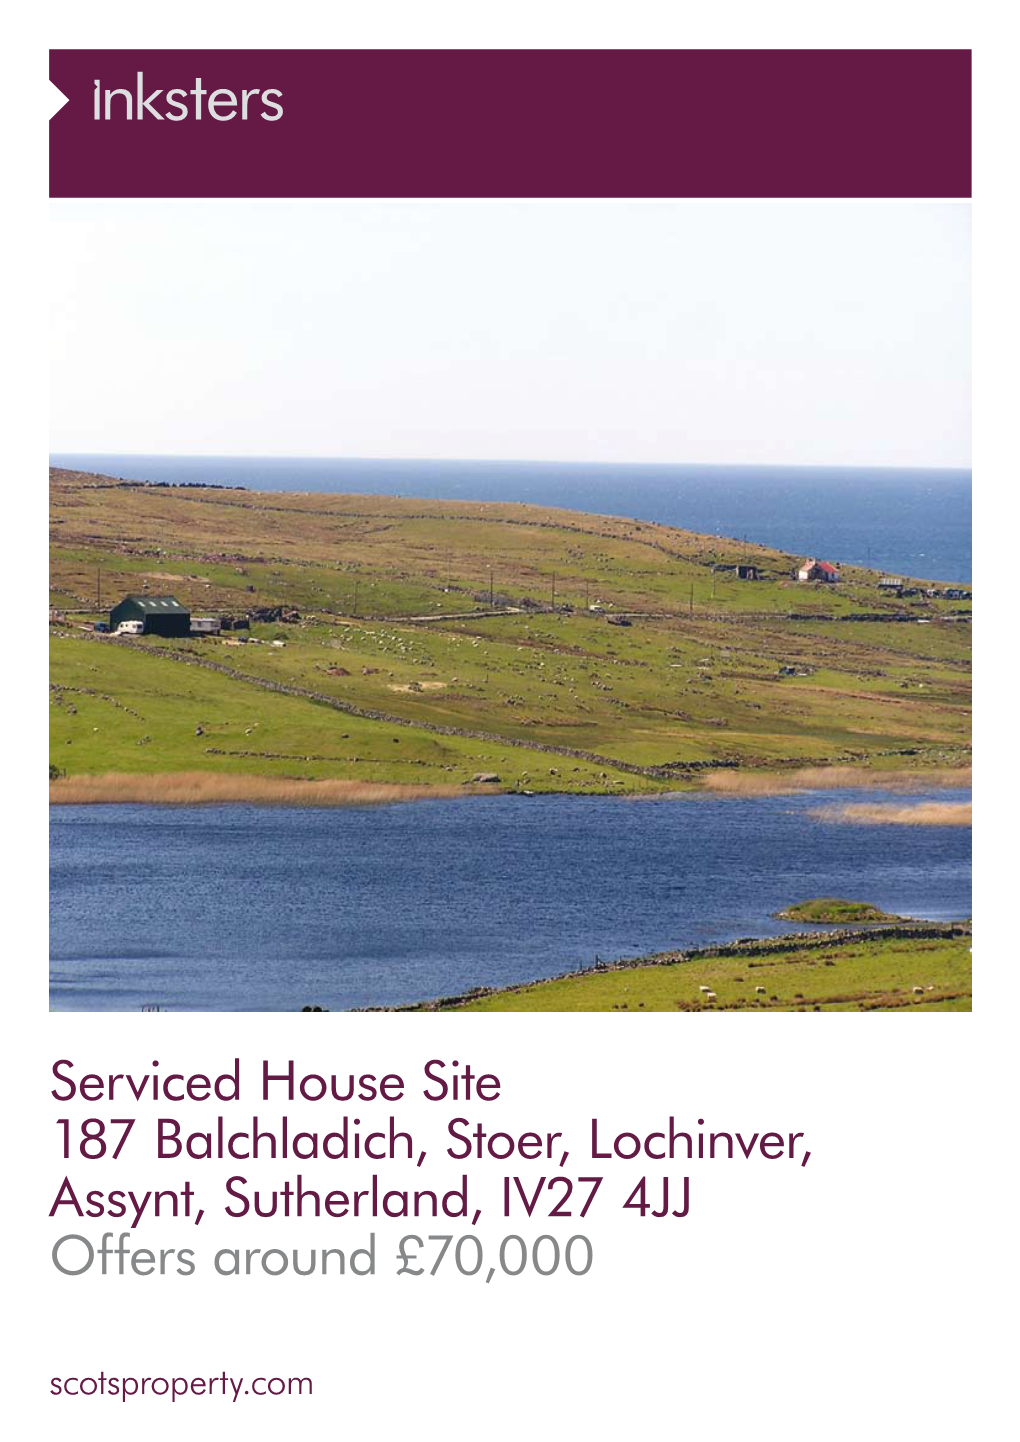 Serviced House Site 187 Balchladich, Stoer, Lochinver, Assynt